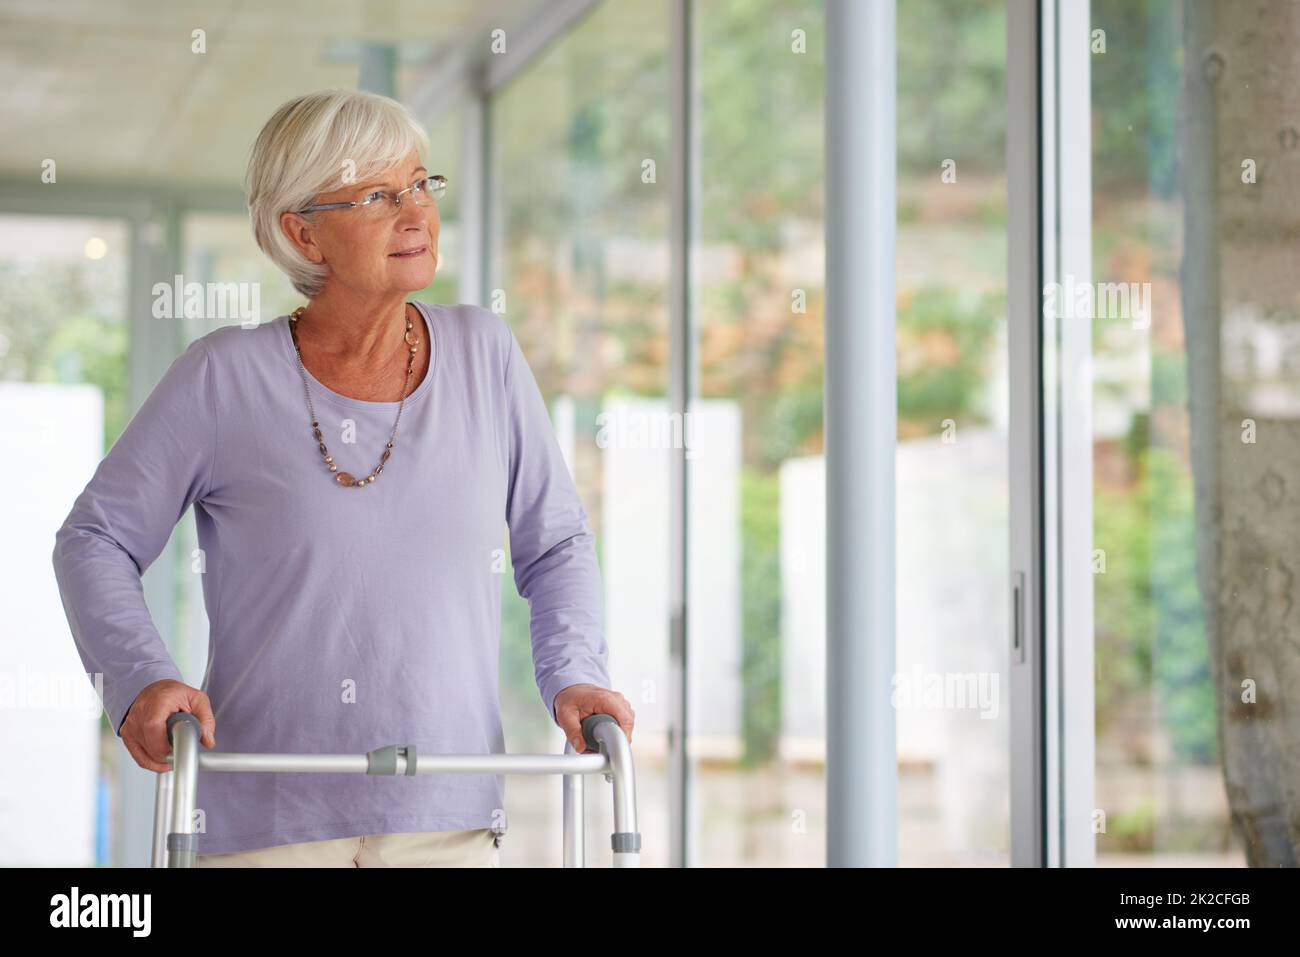 Every reason to be positive. Shot of a senior woman using an orthopedic walker indoors. Stock Photo